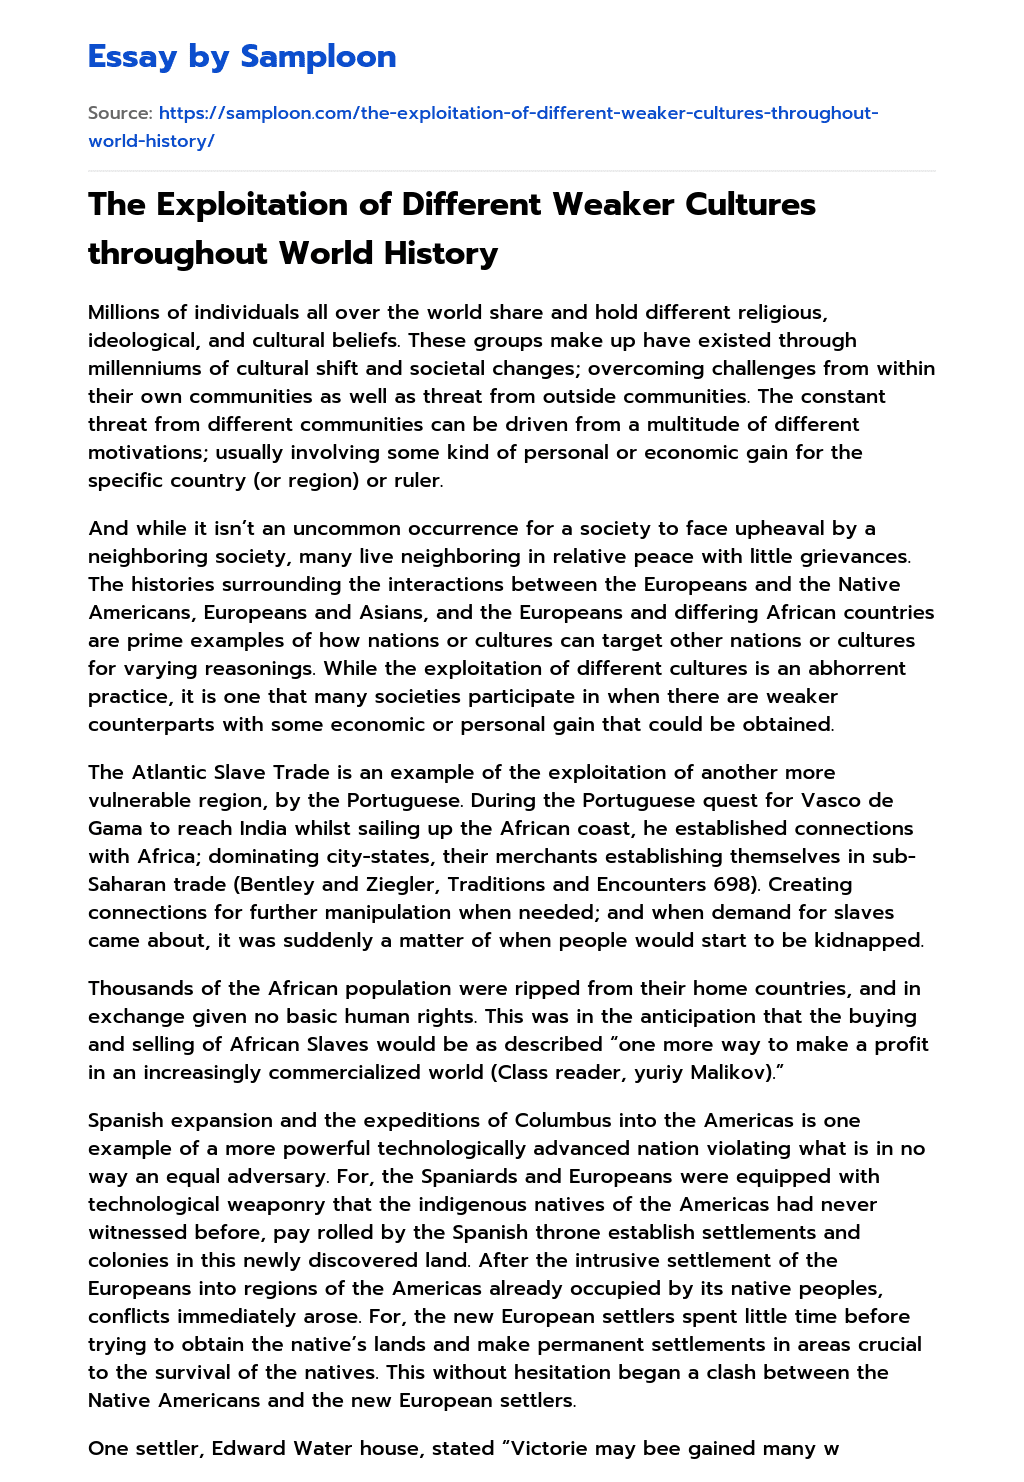 The Exploitation of Different Weaker Cultures throughout World History  essay